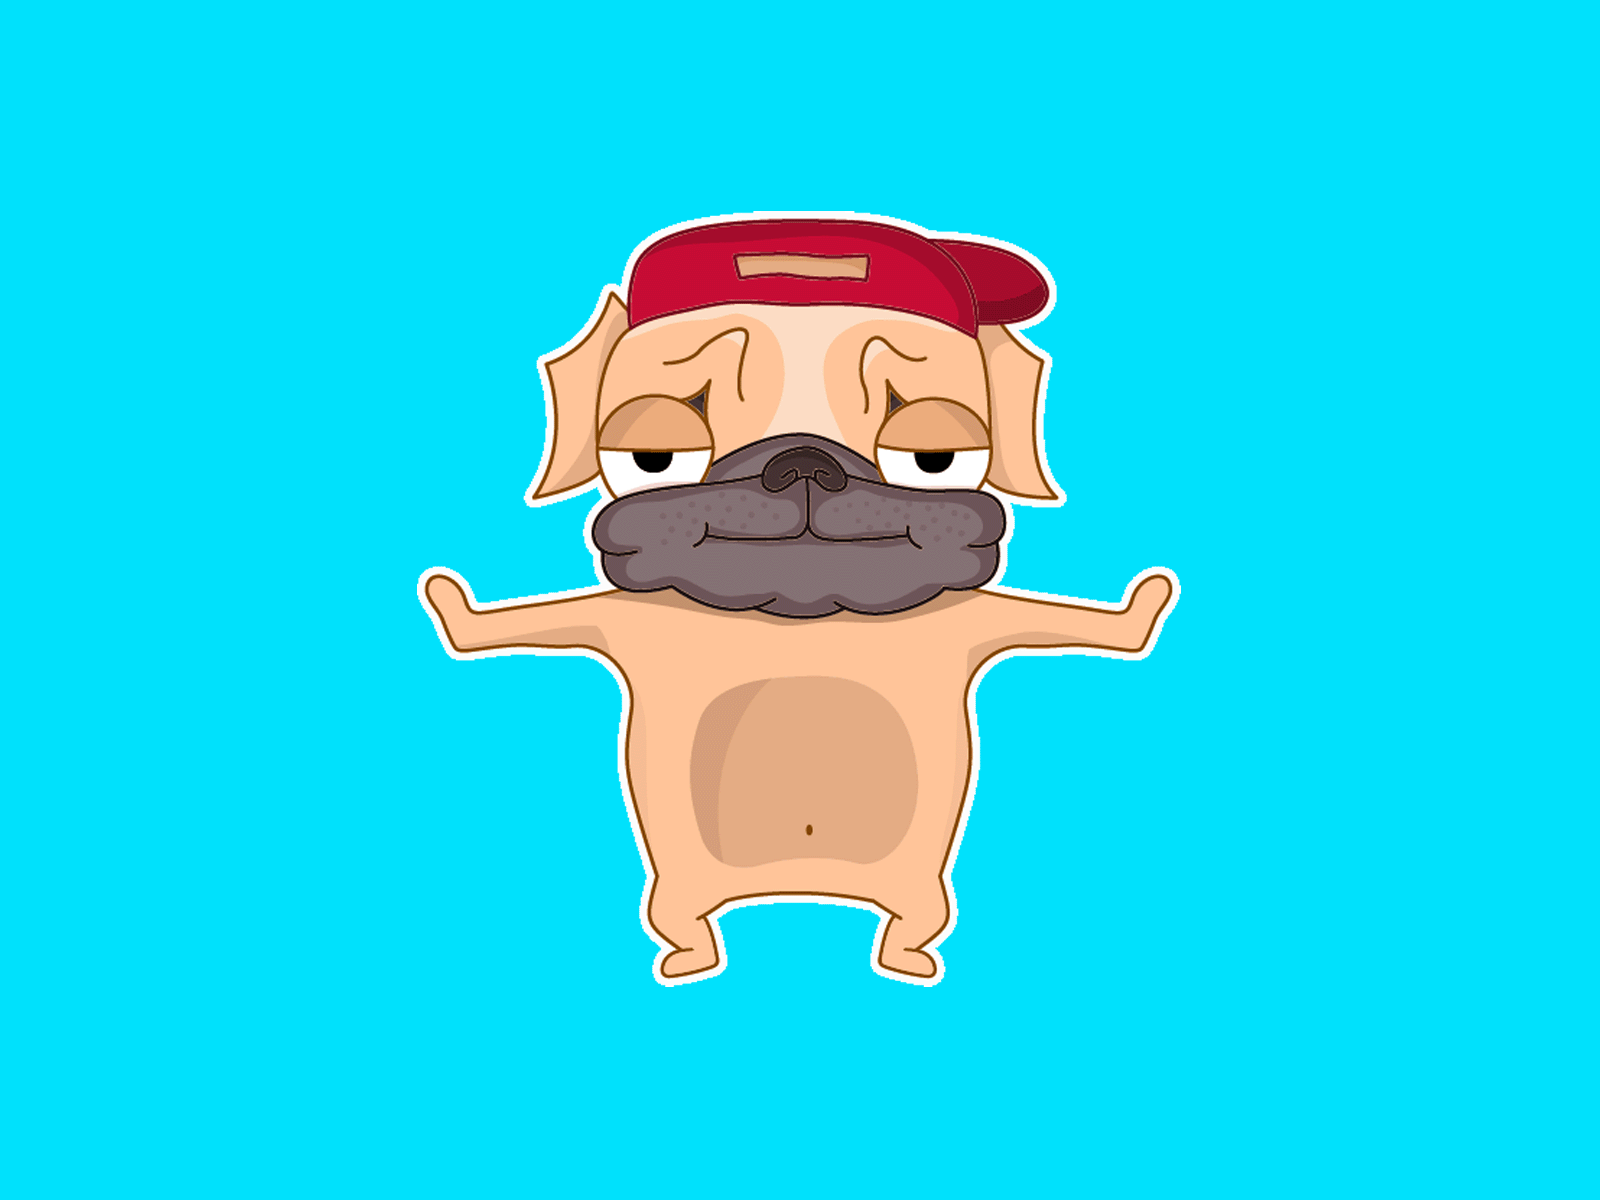 Arm Wave Tutorial from Pugly animal animation cartoon character animation character design character designer character designs cute dance design dog doggy dogs dribbbleweeklywarmup illustration illustrator pug pugly sticker design stickers